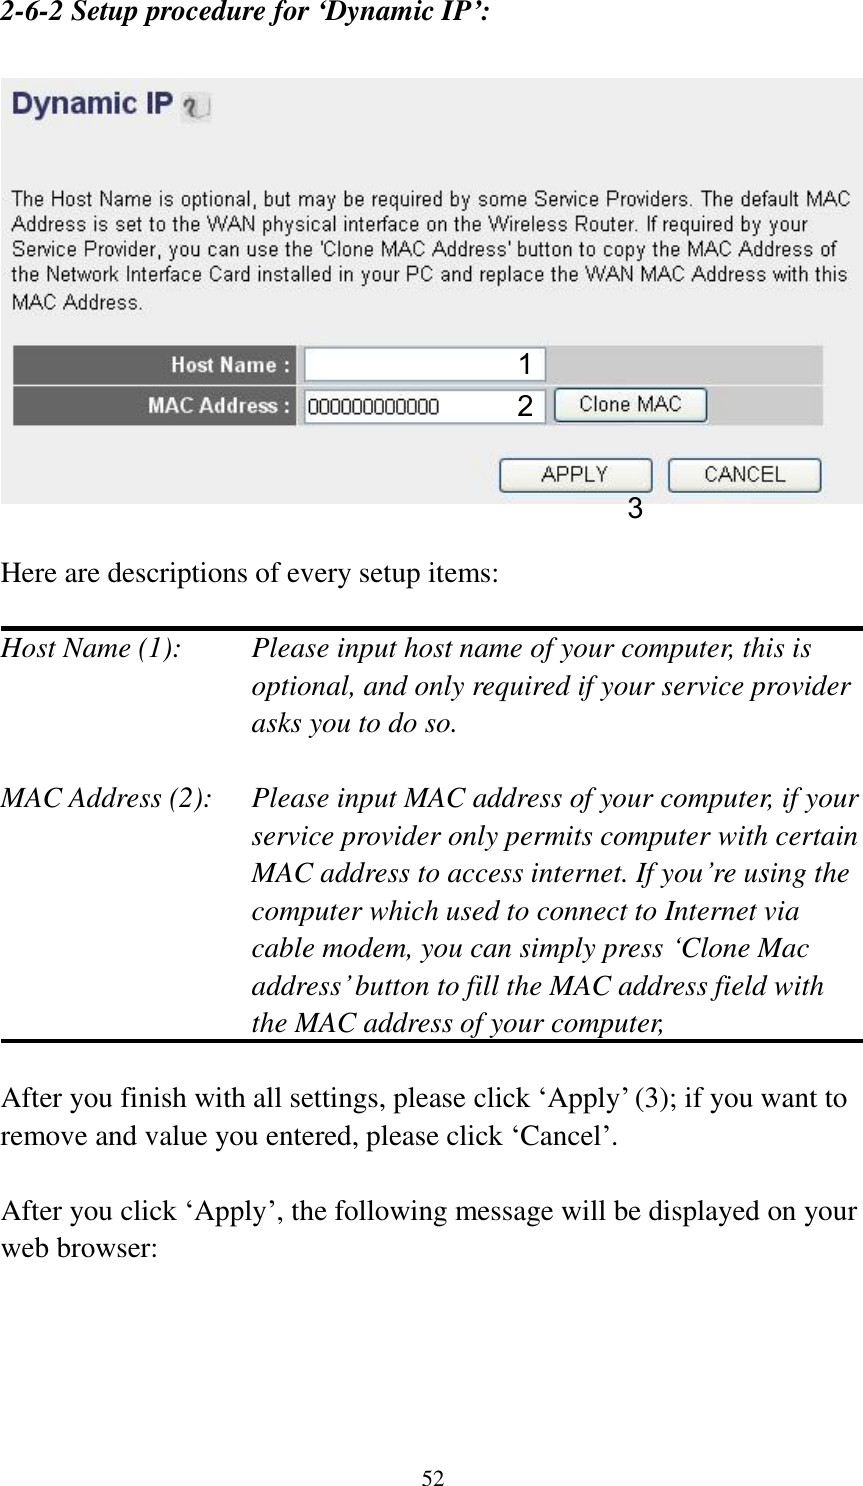 52 2-6-2 Setup procedure for ‘Dynamic IP’:     Here are descriptions of every setup items:  Host Name (1):    Please input host name of your computer, this is optional, and only required if your service provider asks you to do so.    MAC Address (2):    Please input MAC address of your computer, if your service provider only permits computer with certain MAC address to access internet. If you‟re using the computer which used to connect to Internet via cable modem, you can simply press „Clone Mac address‟ button to fill the MAC address field with the MAC address of your computer,    After you finish with all settings, please click „Apply‟ (3); if you want to remove and value you entered, please click „Cancel‟.  After you click „Apply‟, the following message will be displayed on your web browser:  1 2 3 